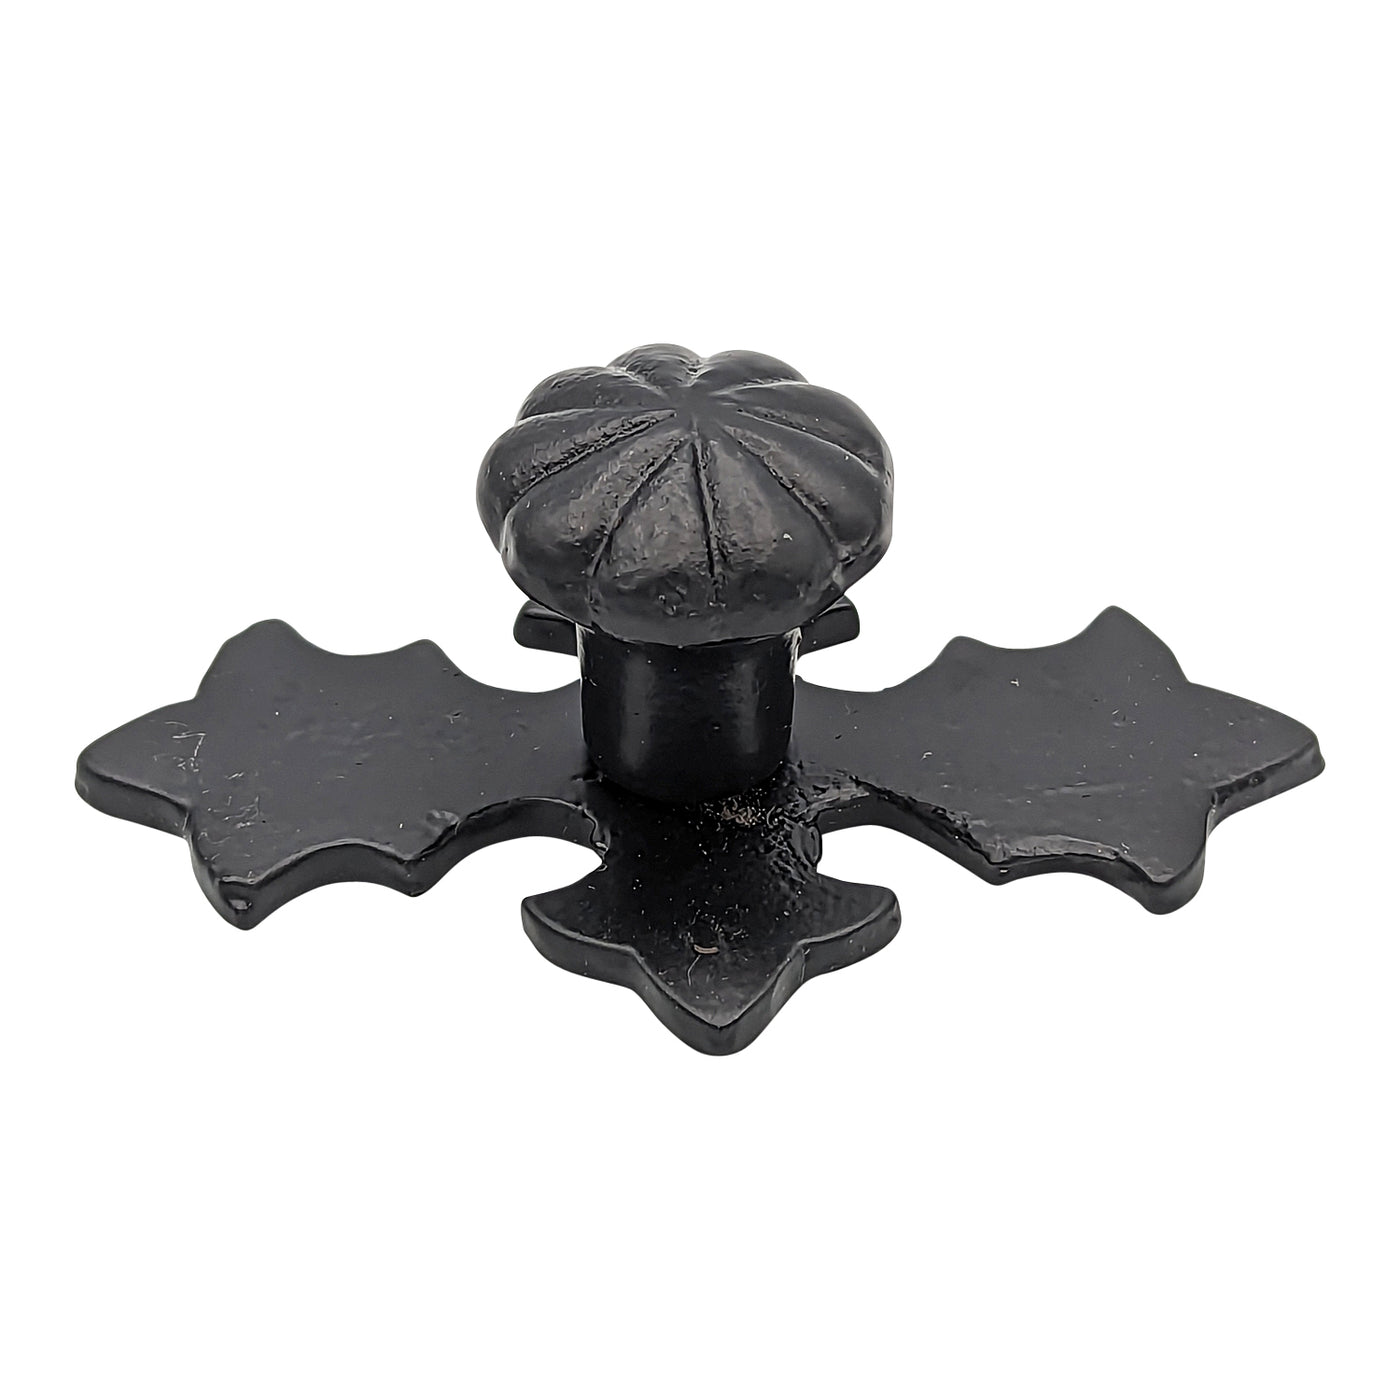 4 1/8 Inch Wide Solid Iron Cross Pattern Cabinet & Furniture Knob